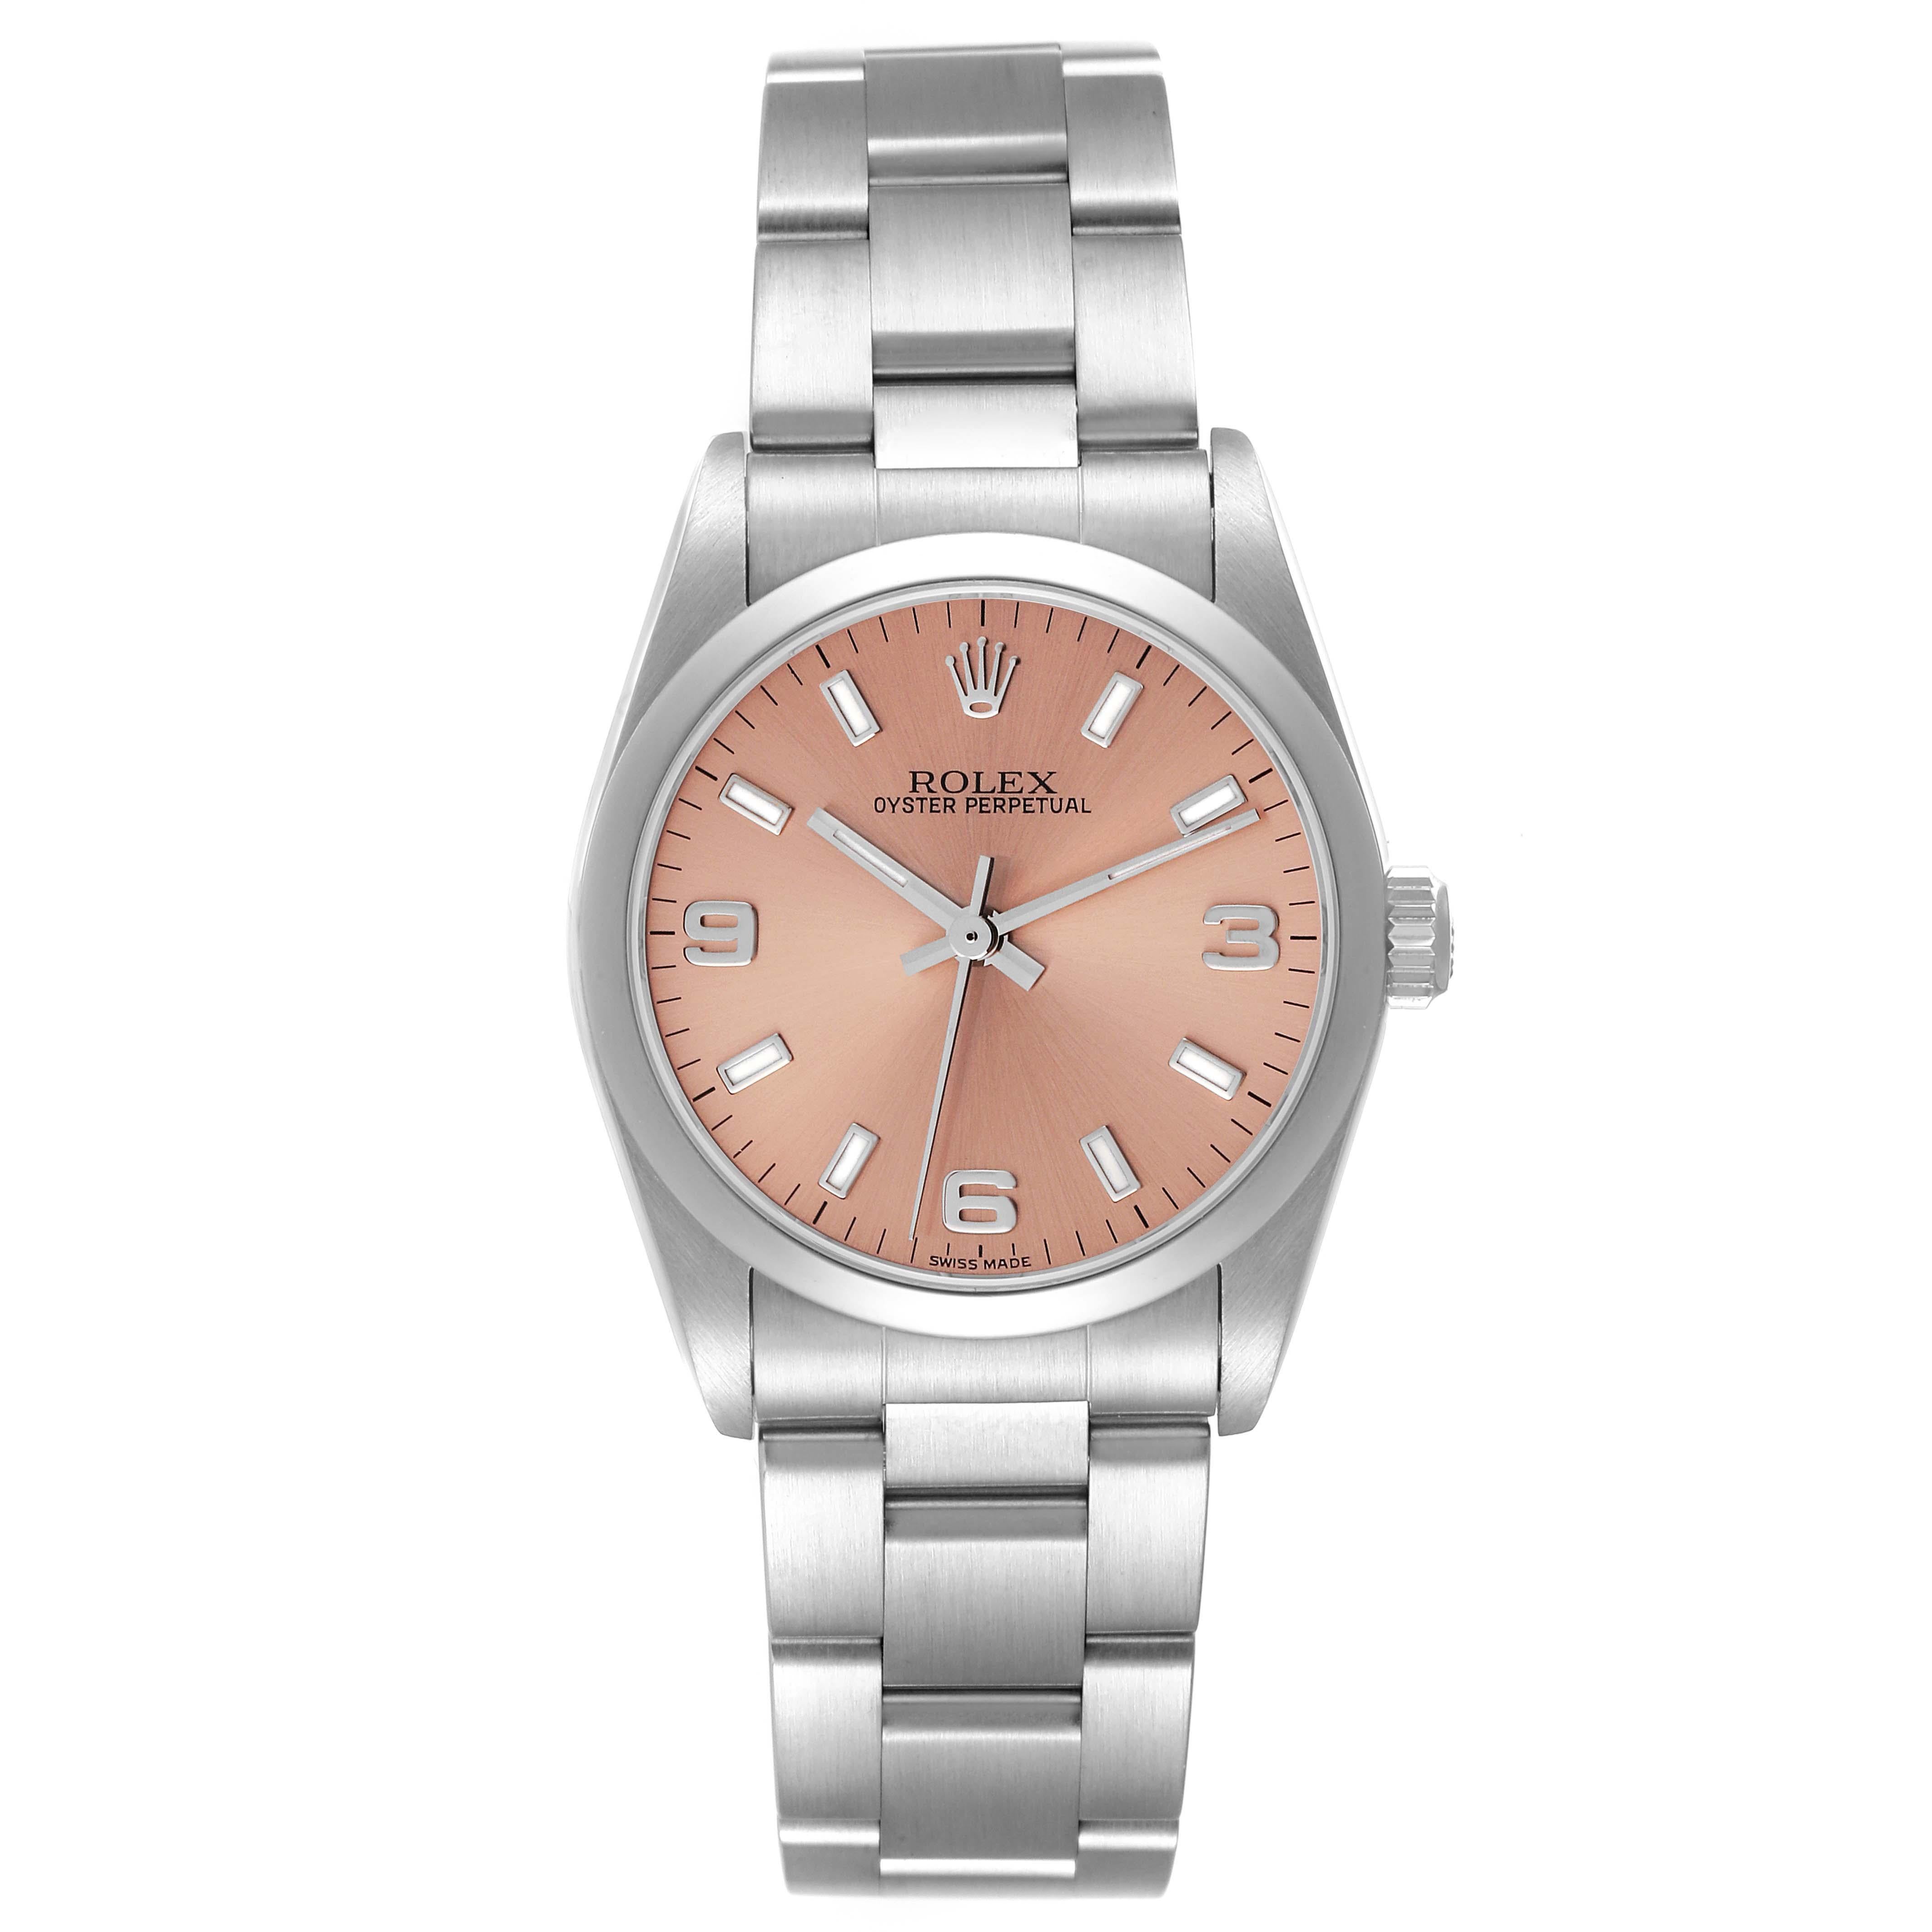 Rolex Oyster Perpetual Midsize Salmon Dial Steel Ladies Watch 77080. Officially certified chronometer automatic self-winding movement. Stainless steel oyster case 31.0 mm in diameter. Rolex logo on the crown. Stainless steel smooth bezel. Scratch